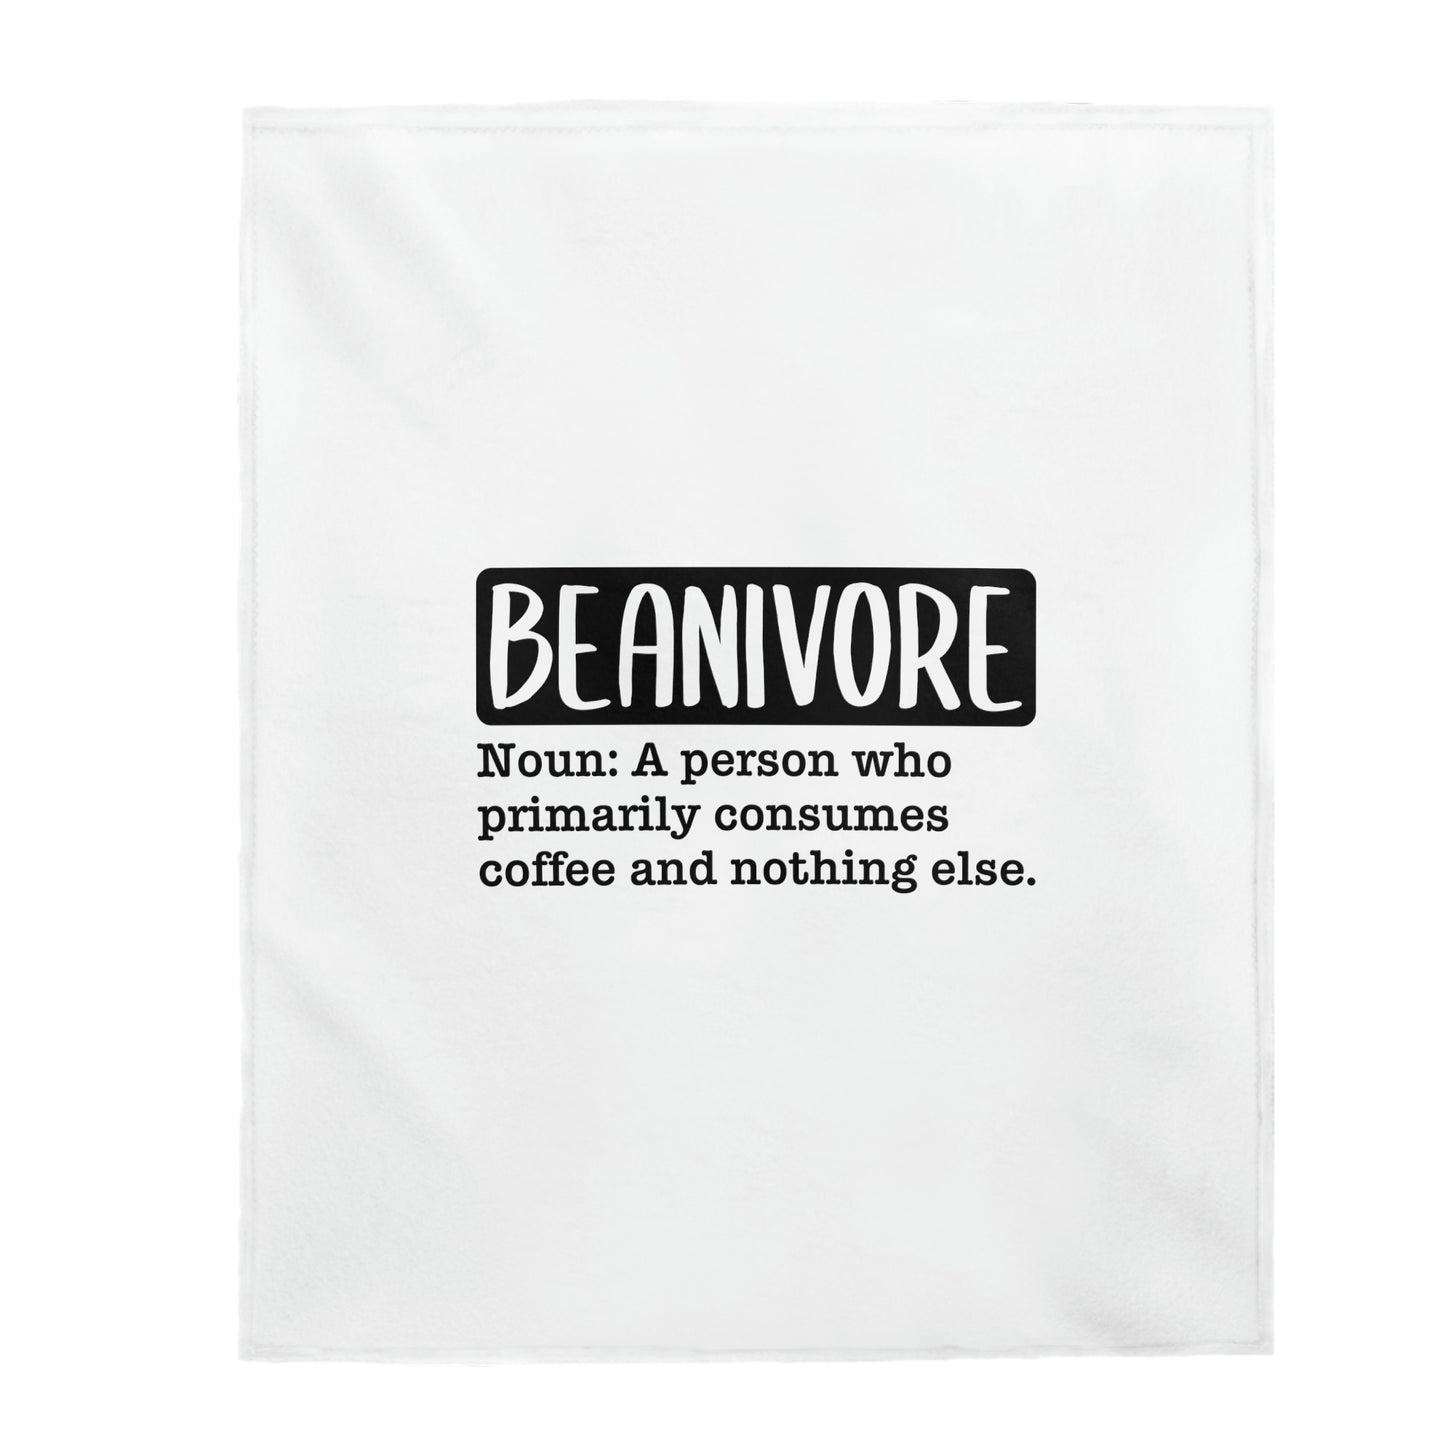 Beanivore: A Person Who Primarily Consumes Coffee And Nothing Else - Velveteen Plush Blanket